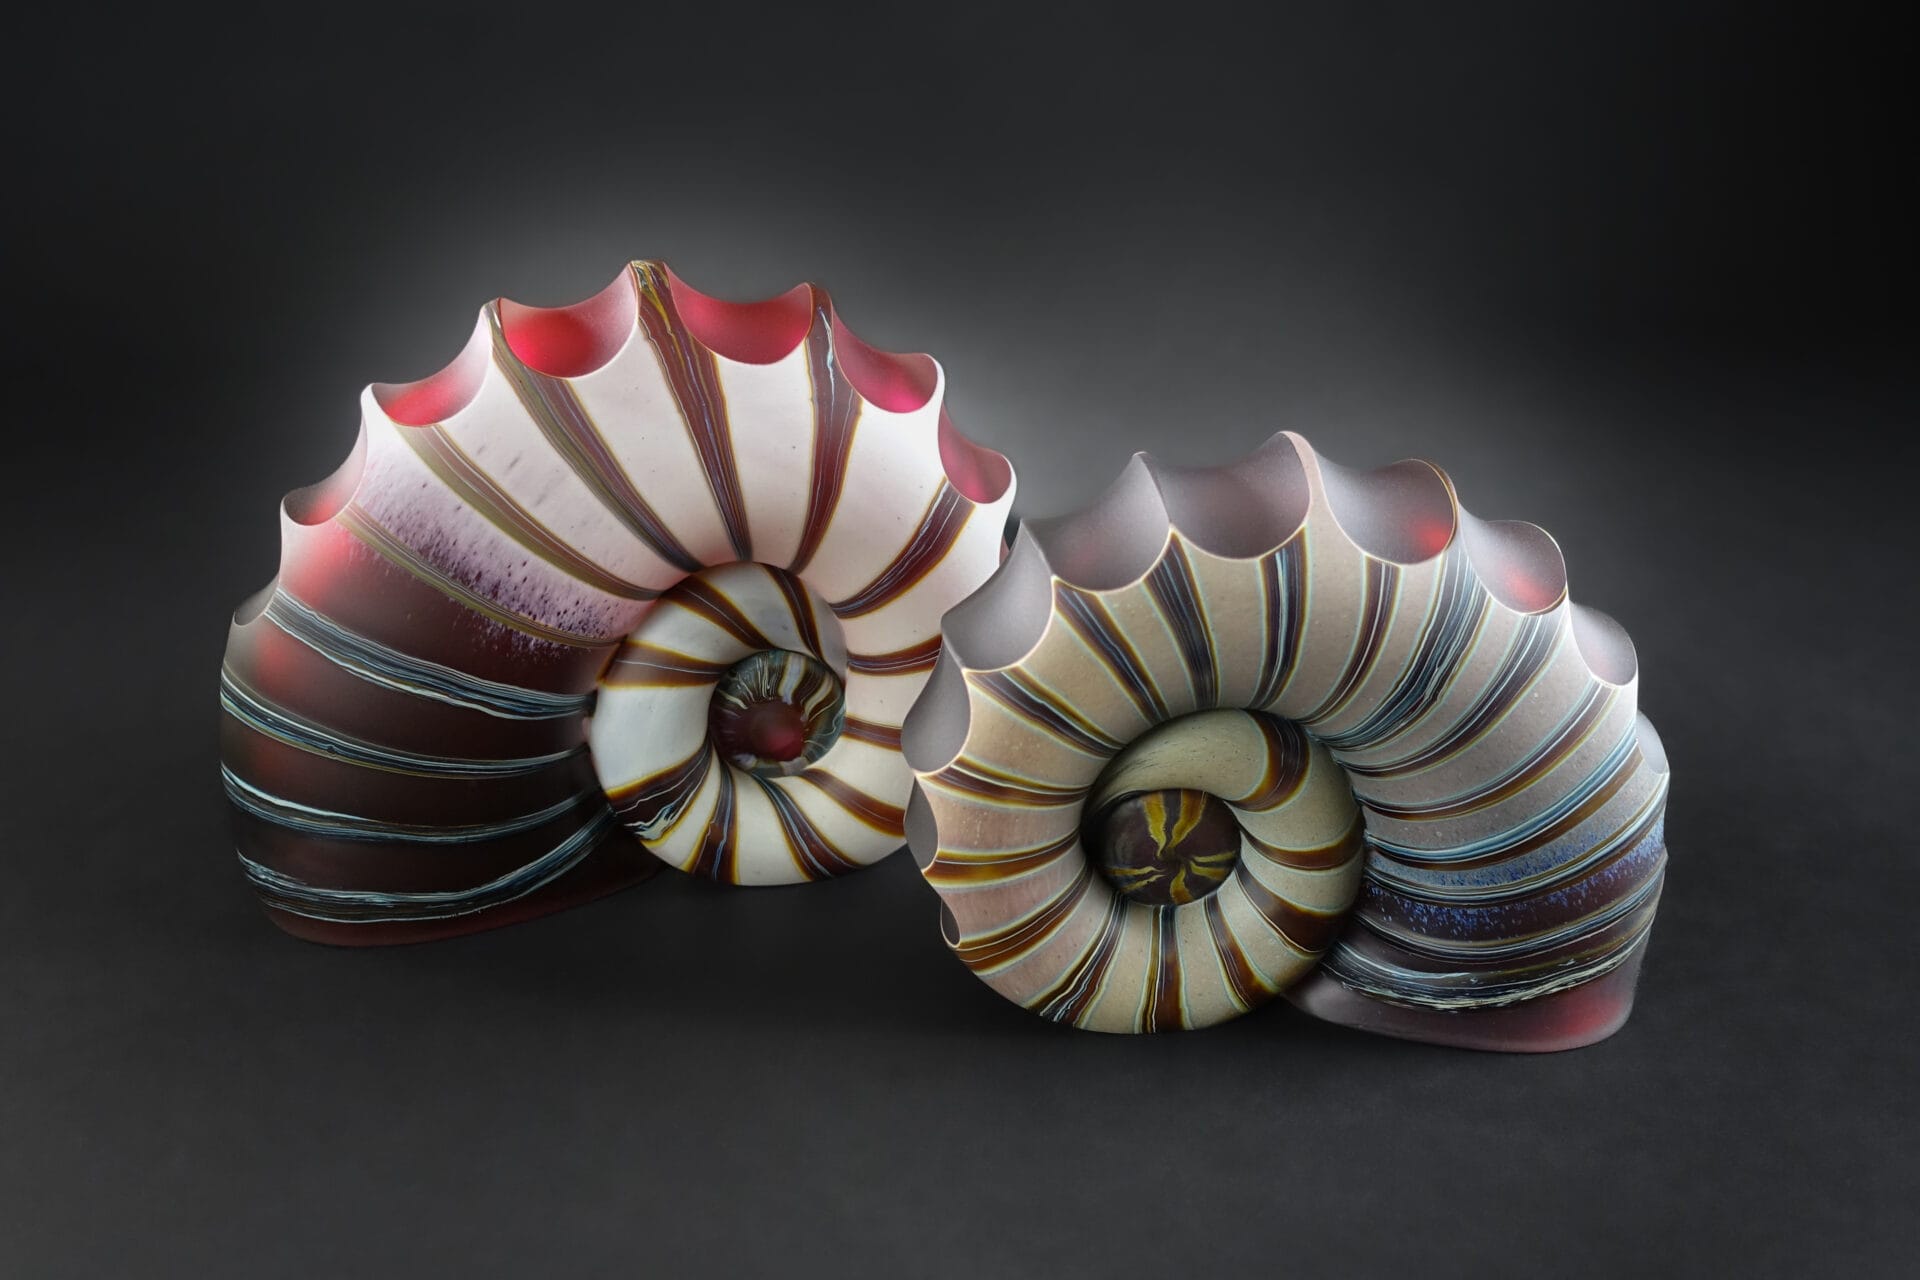 Two glass ammonites, in their unique spiral shell, in hues of ivory, red, and blue.